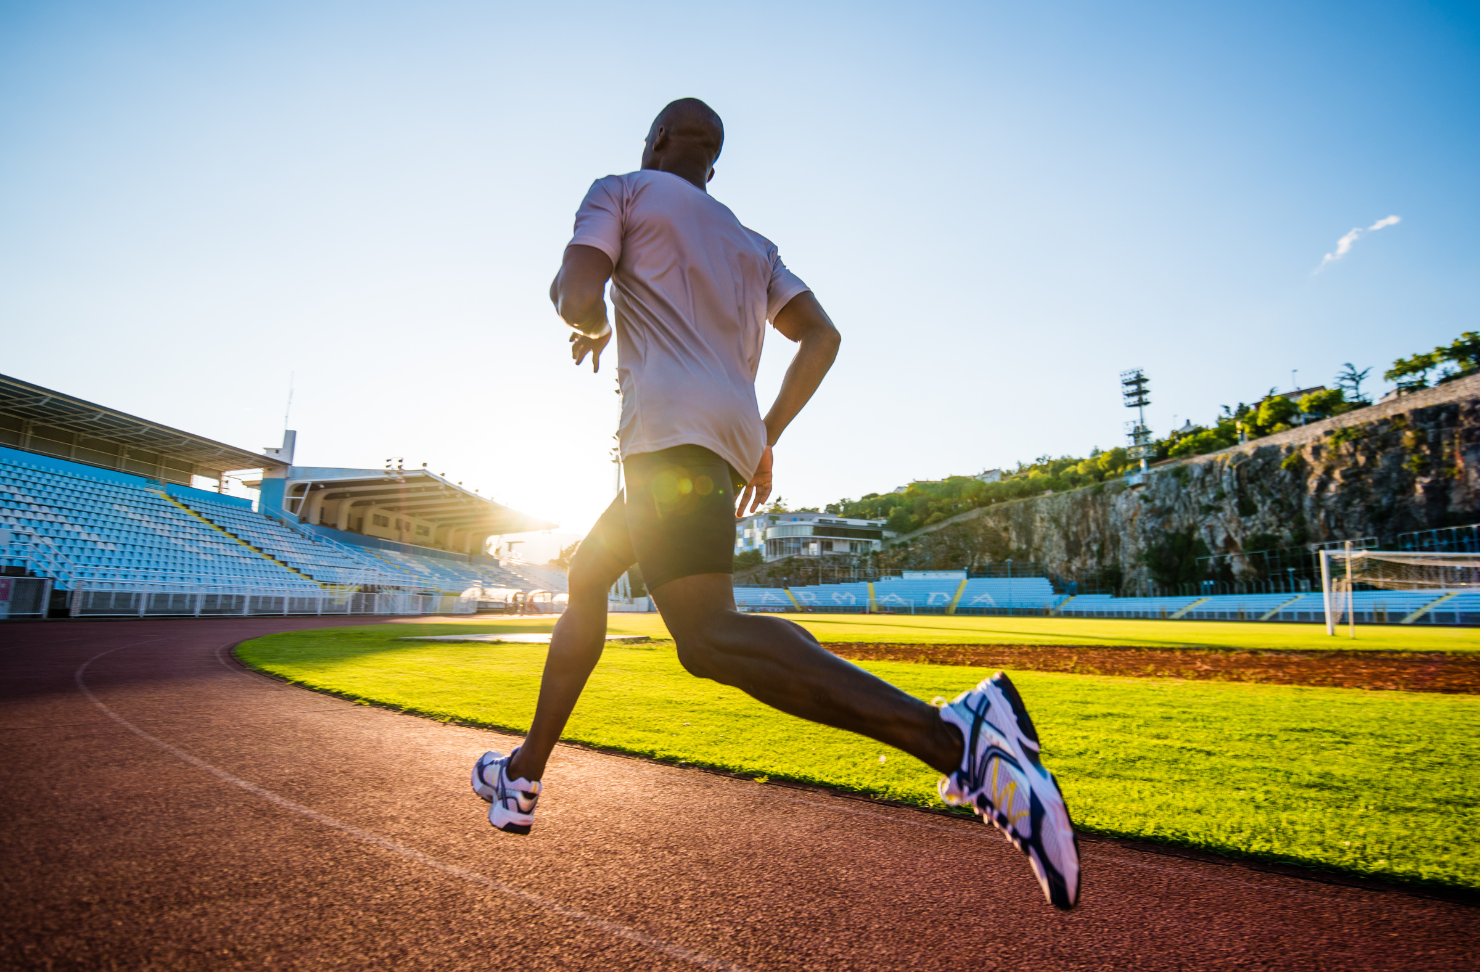 A man is running on a track in a stadium.